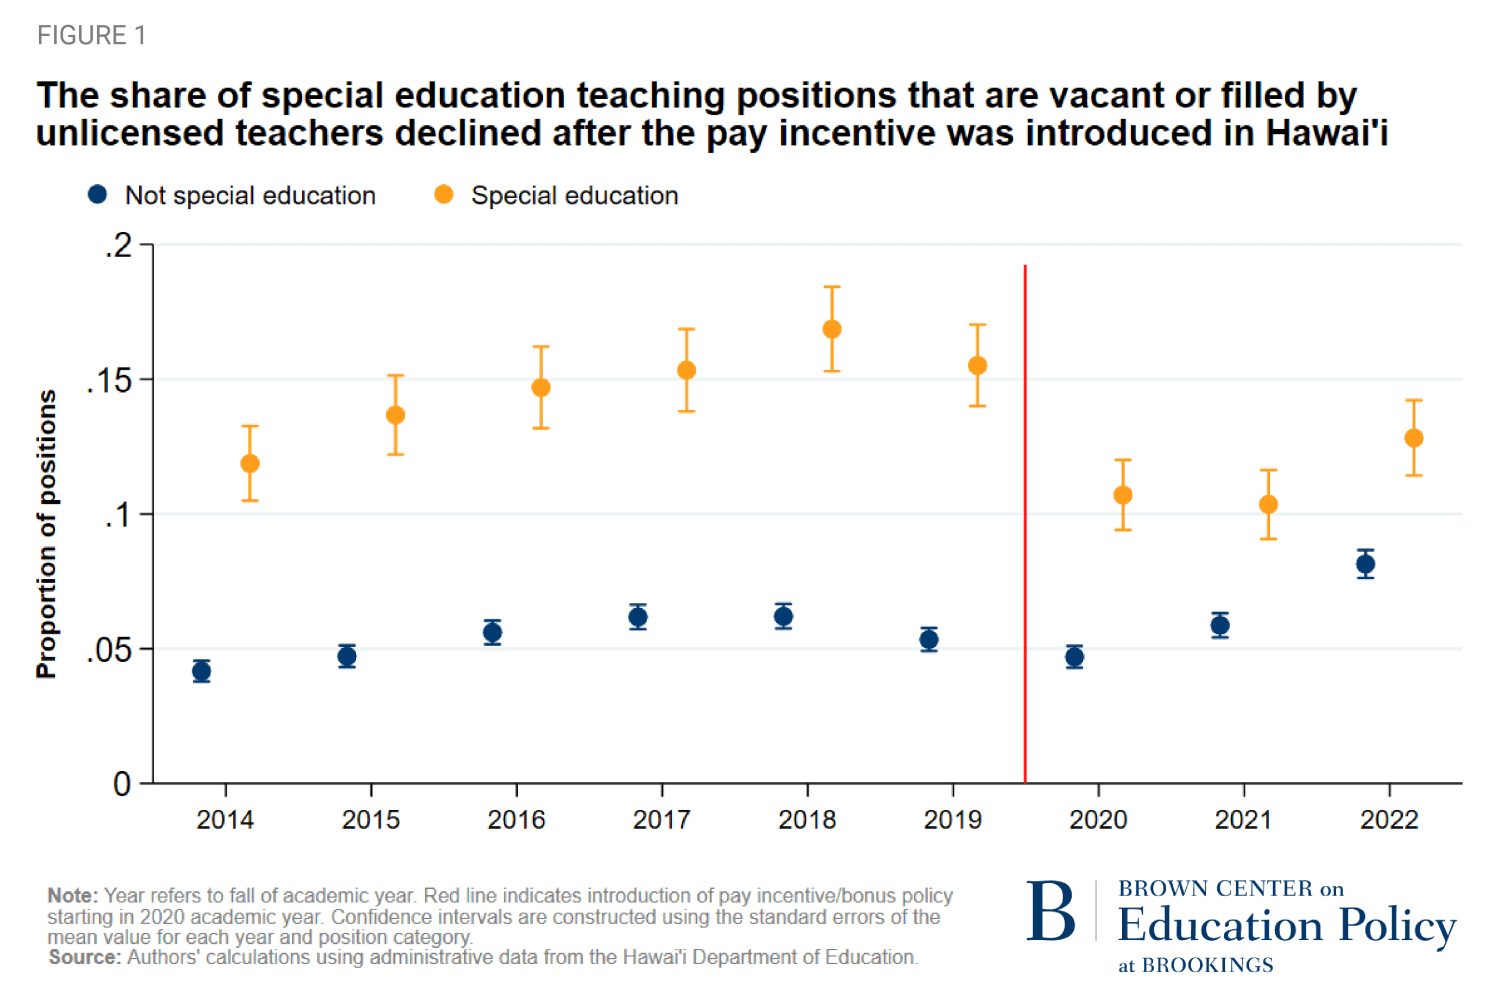 Figure depicting how the share of special education teaching positions that are vacant or filled by unlicensed teachers declined after the pay incentive was introduced in Hawai'i